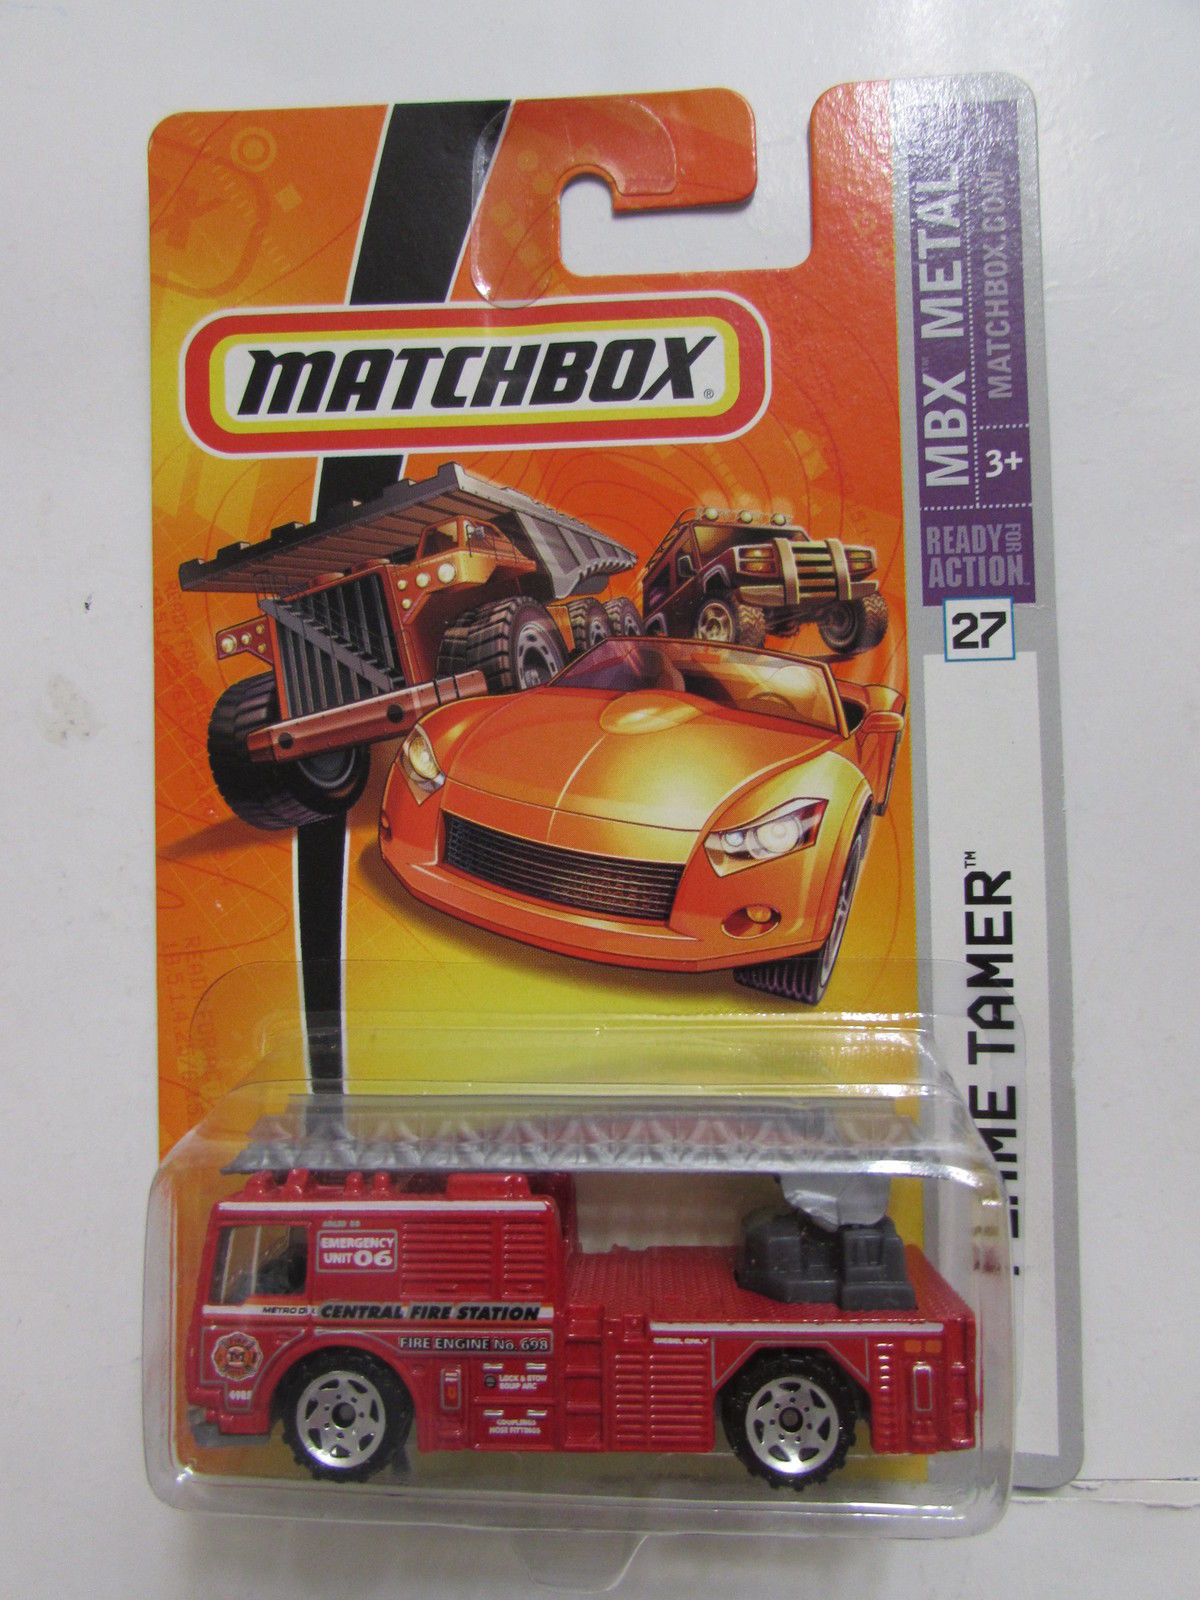 MATCHBOX 2006 FLAME TAMER #27 RED [171370026525] - $3.02 ...